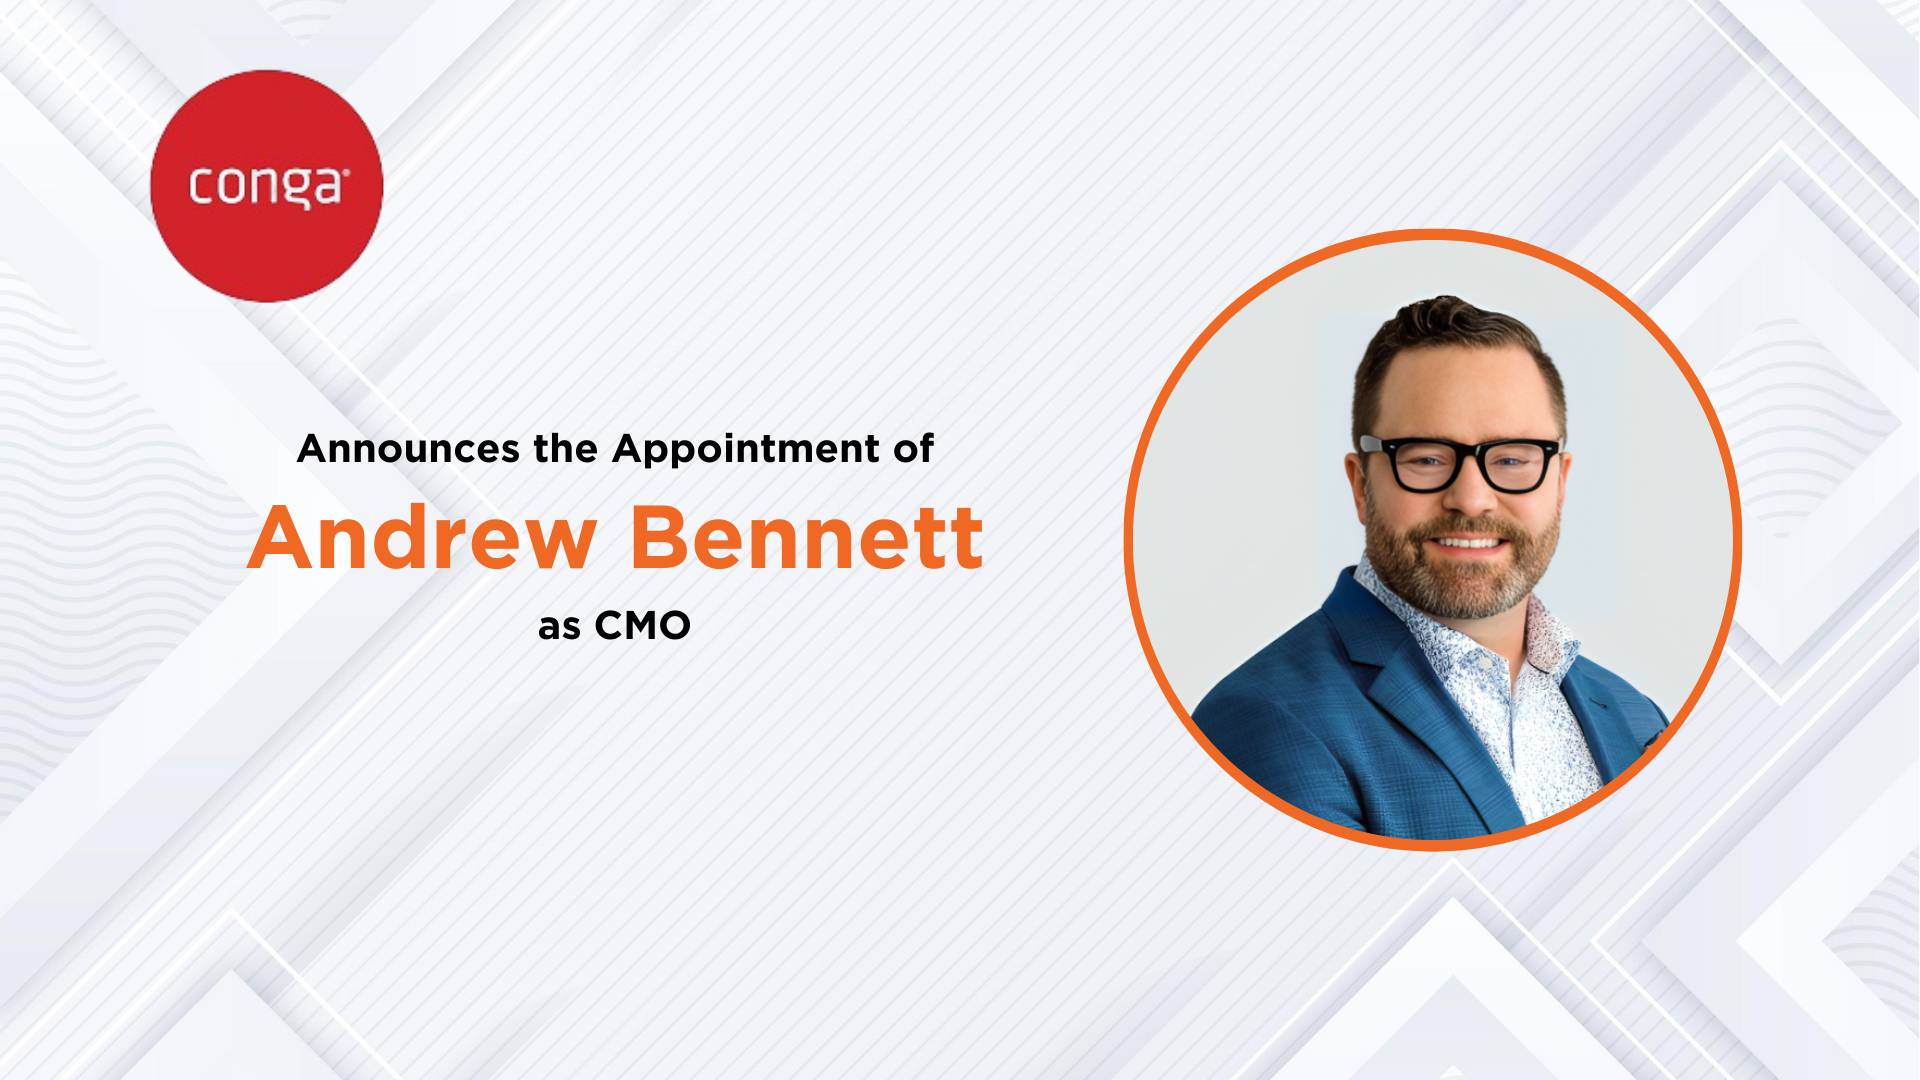 Conga Appoints Andrew Bennett as Chief Marketing Officer